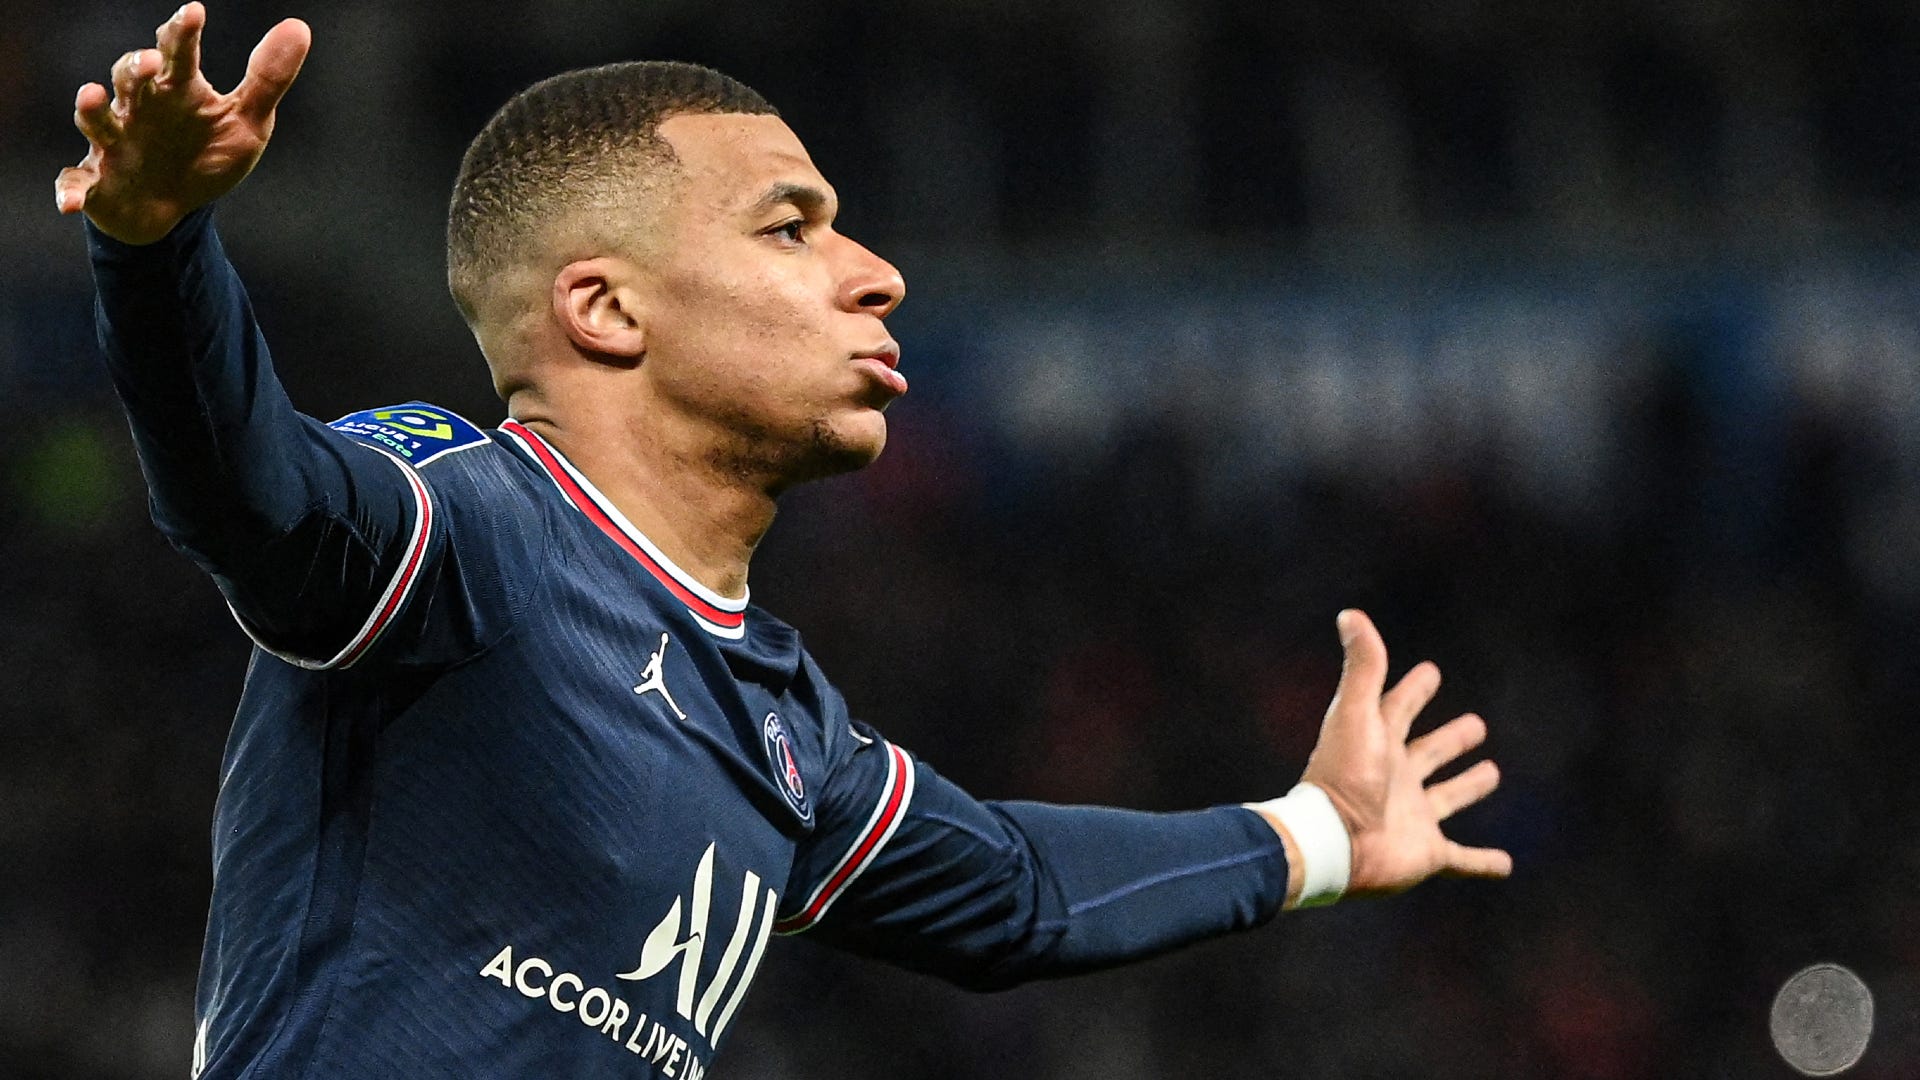 Kylian Mbappe of PSG ranked the most valuable player in the world amongst others stars